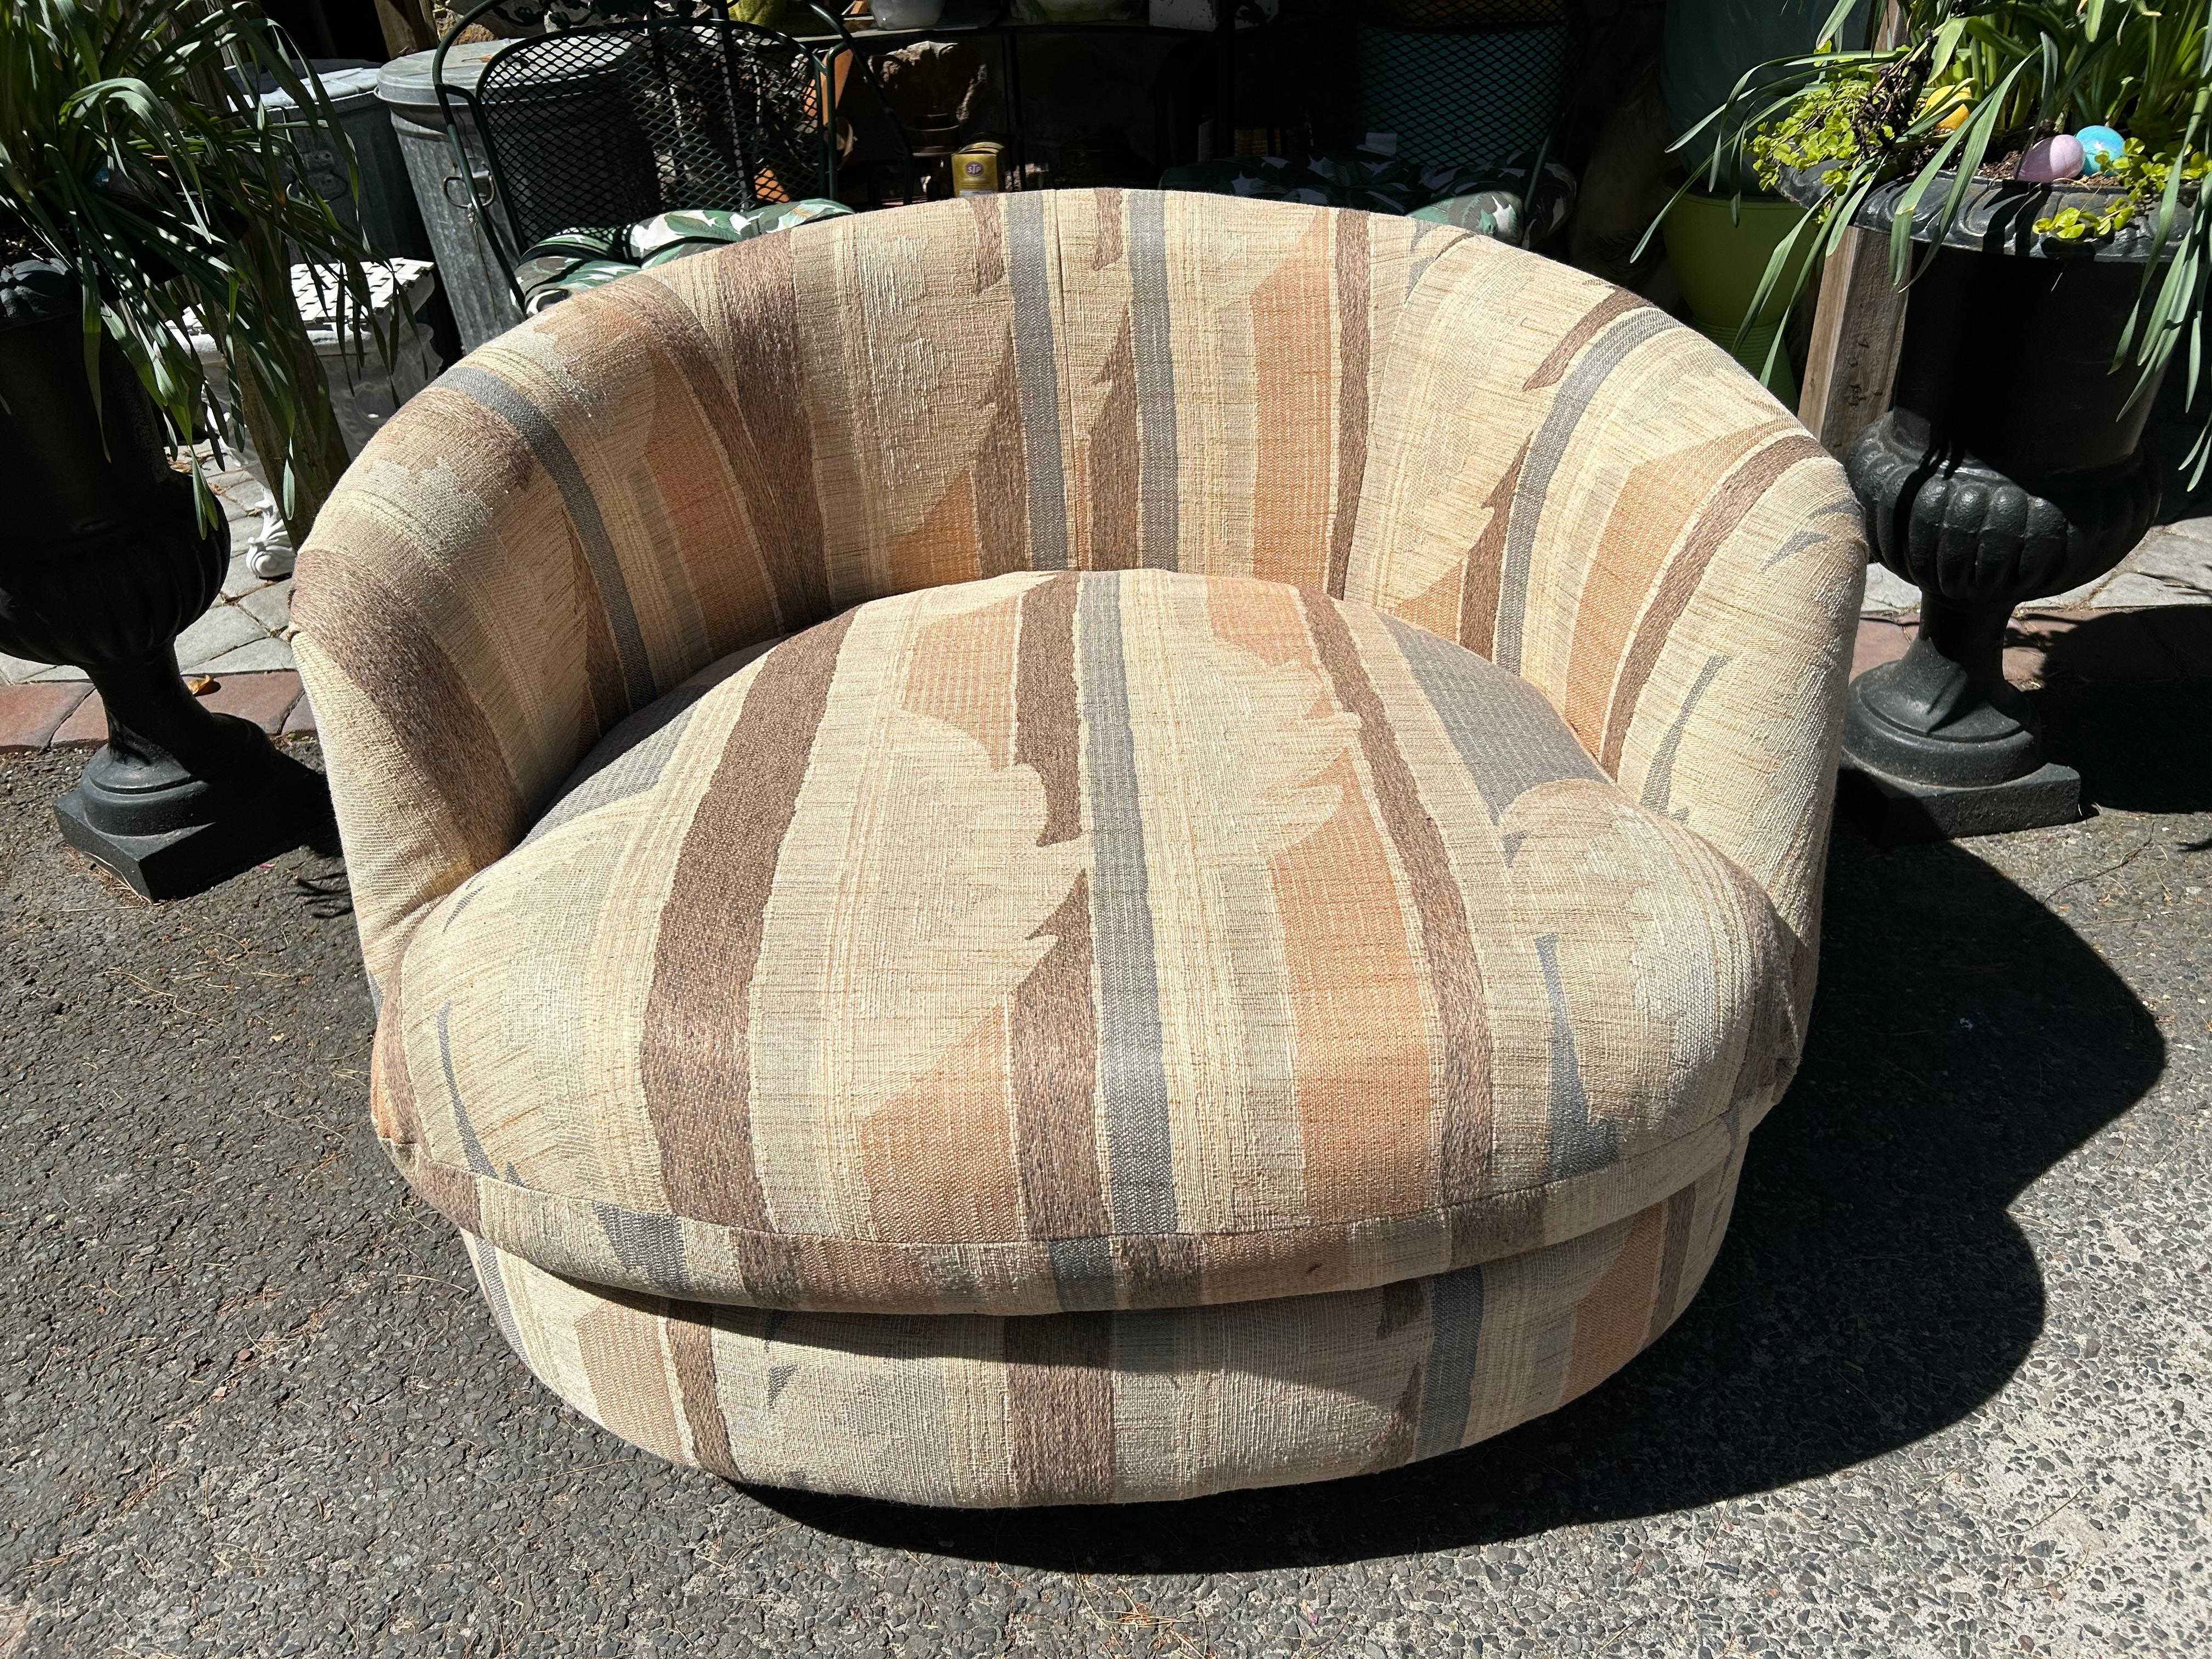 Stylish Milo Baughman style circular swivel lounge chair.  Of-course this piece will need to be reupholstered as the original fabric is quite dated.  The foam and springs are still soft and comfortable.  This chair measures 29